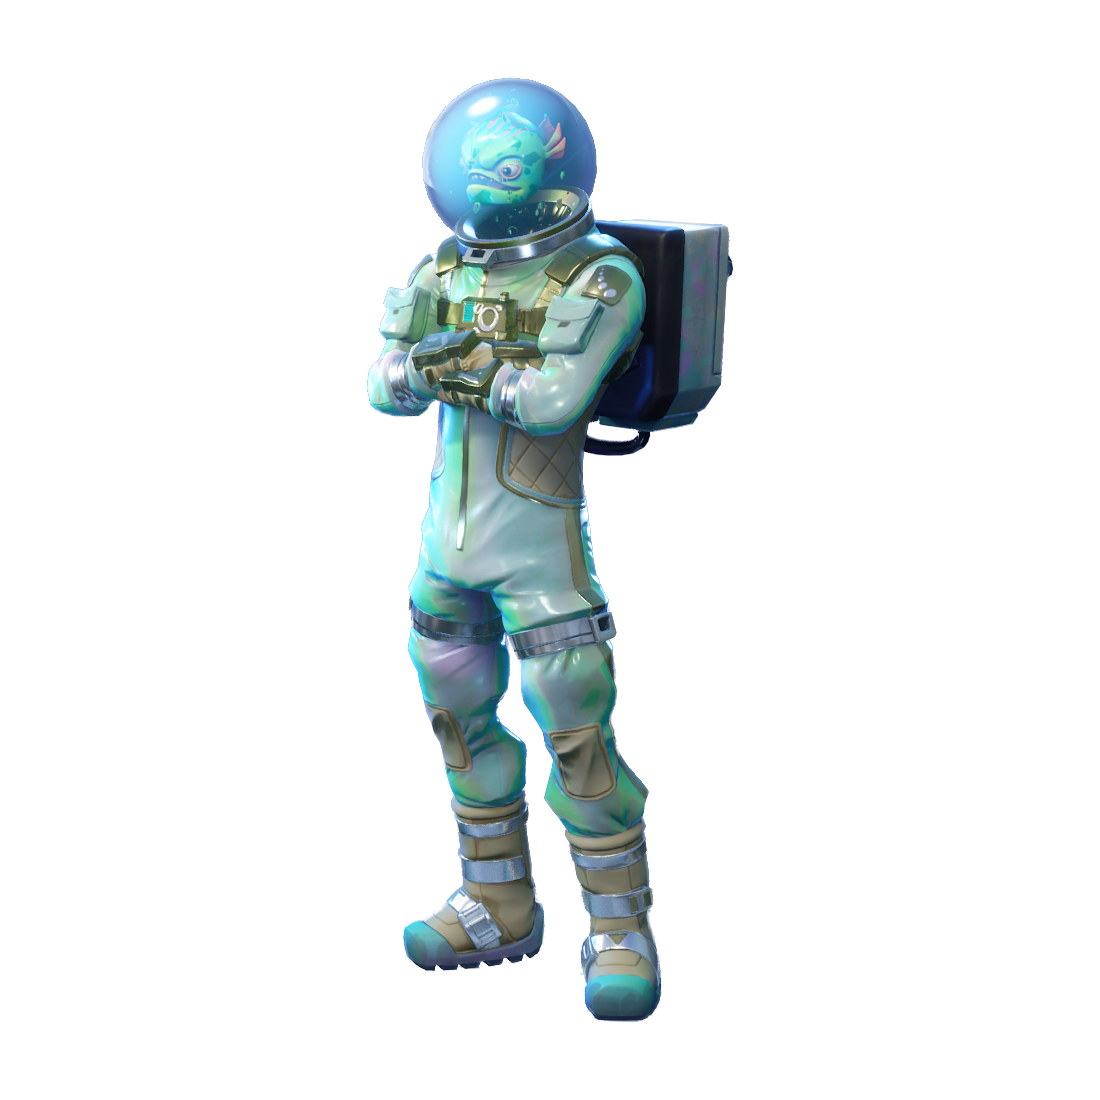 Download Fortnite Leviathan Png Image For Free